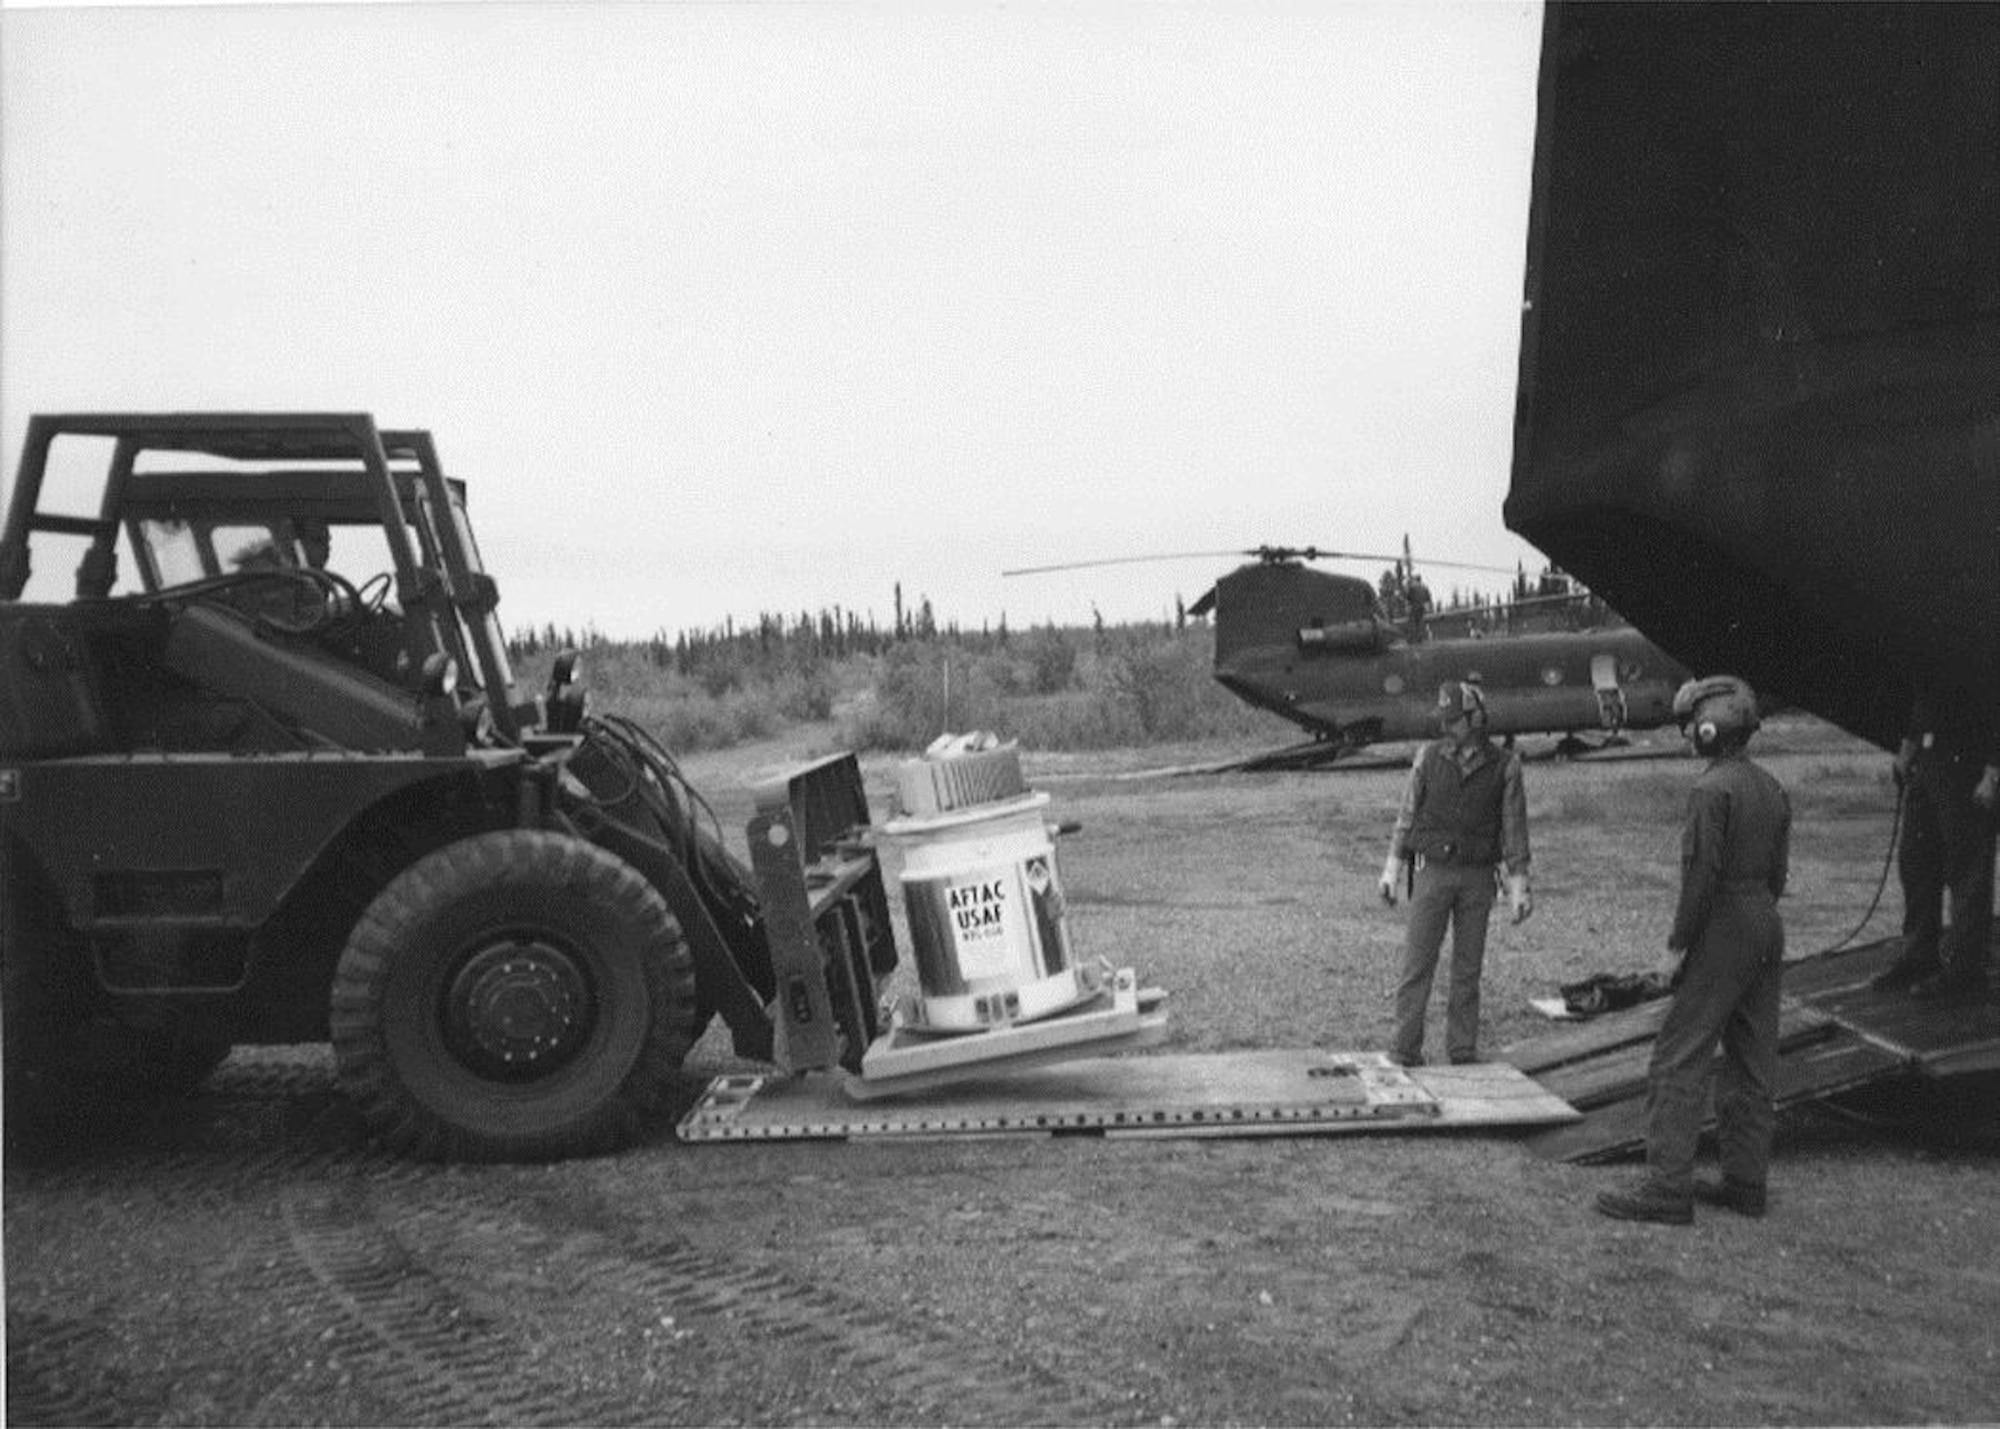 The original radioisotope thermoelectric generator is downloaded from a helicopter at Burnt Mountain, Alaska, 60 miles north of the Arctic Circle, circa 1973.  The generator was once used as a power source for seismometers used by the Air Force Technical Applications Center based at Patrick AFB, Fla.  AFTAC's mission is to verify compliance with nuclear test ban treaties.  (U.S. Air Force photo)